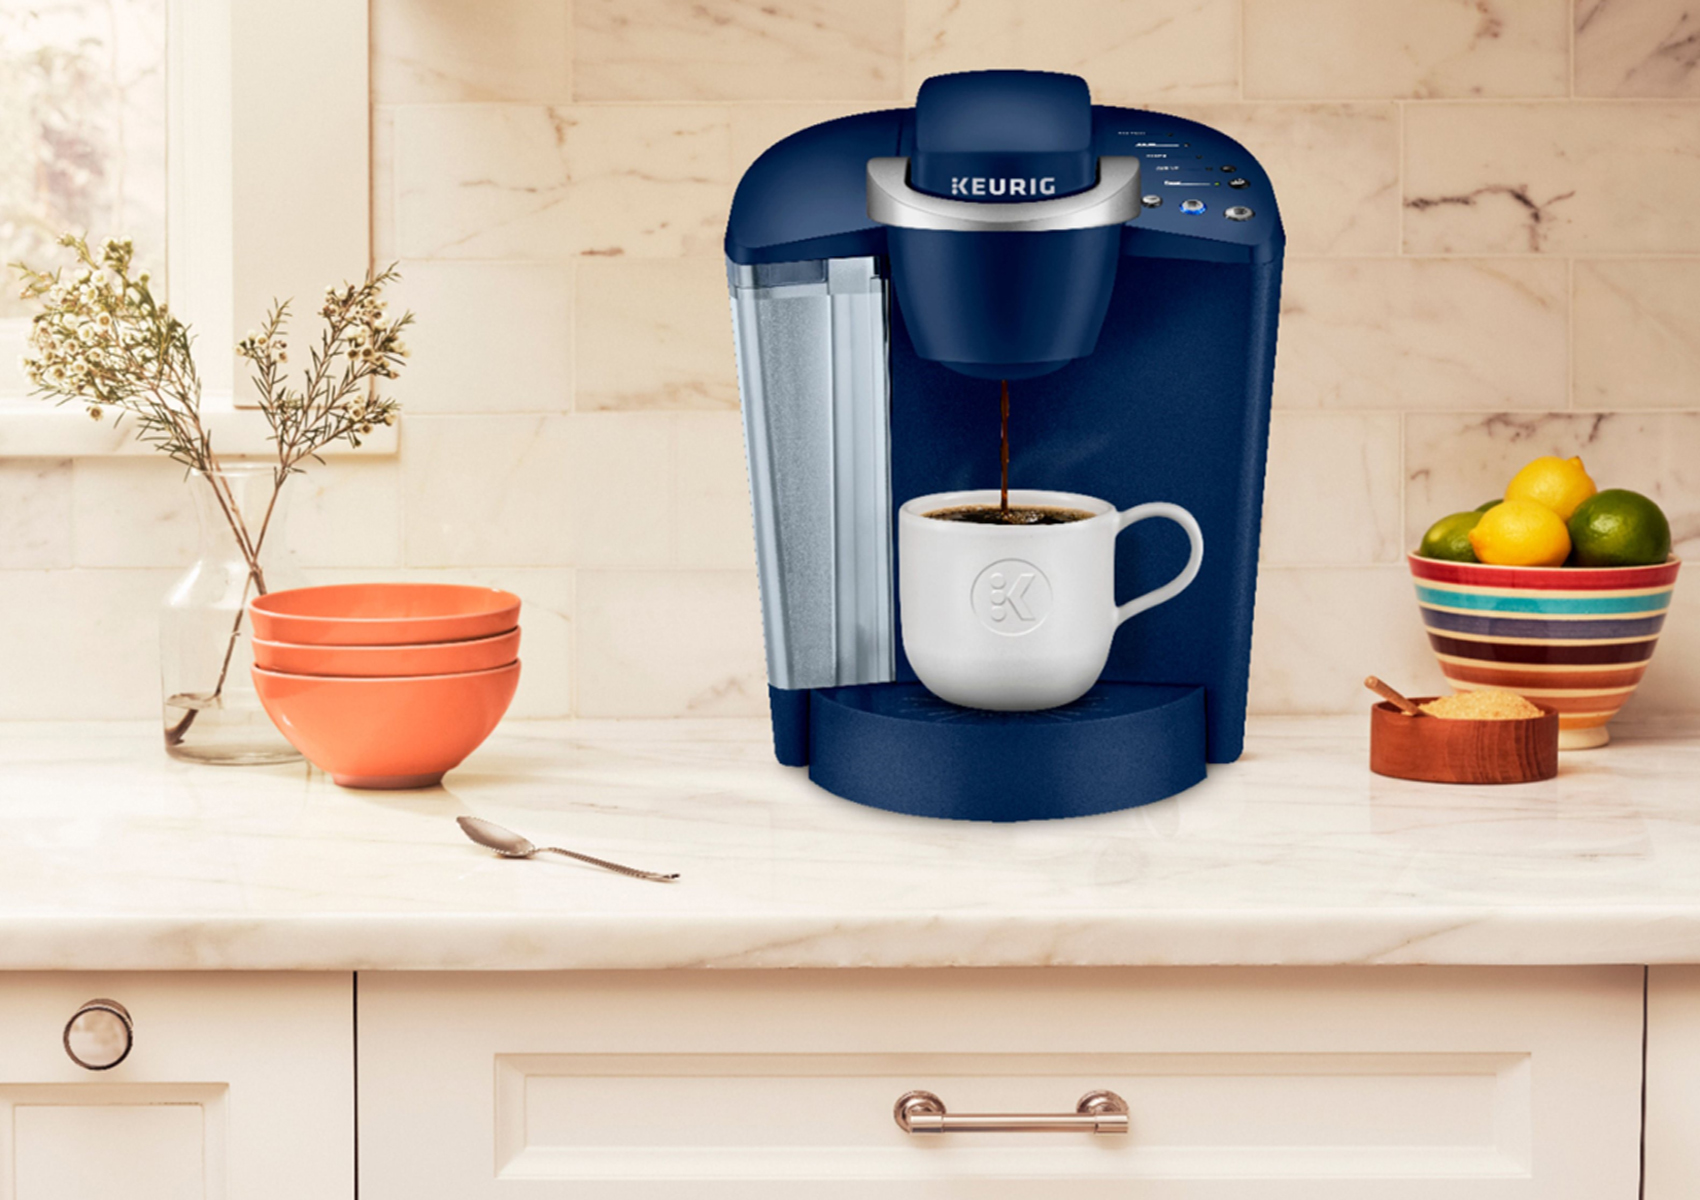 https://www.themanual.com/wp-content/uploads/sites/9/2022/03/how-to-clean-a-keurig.jpg?fit=800%2C564&p=1